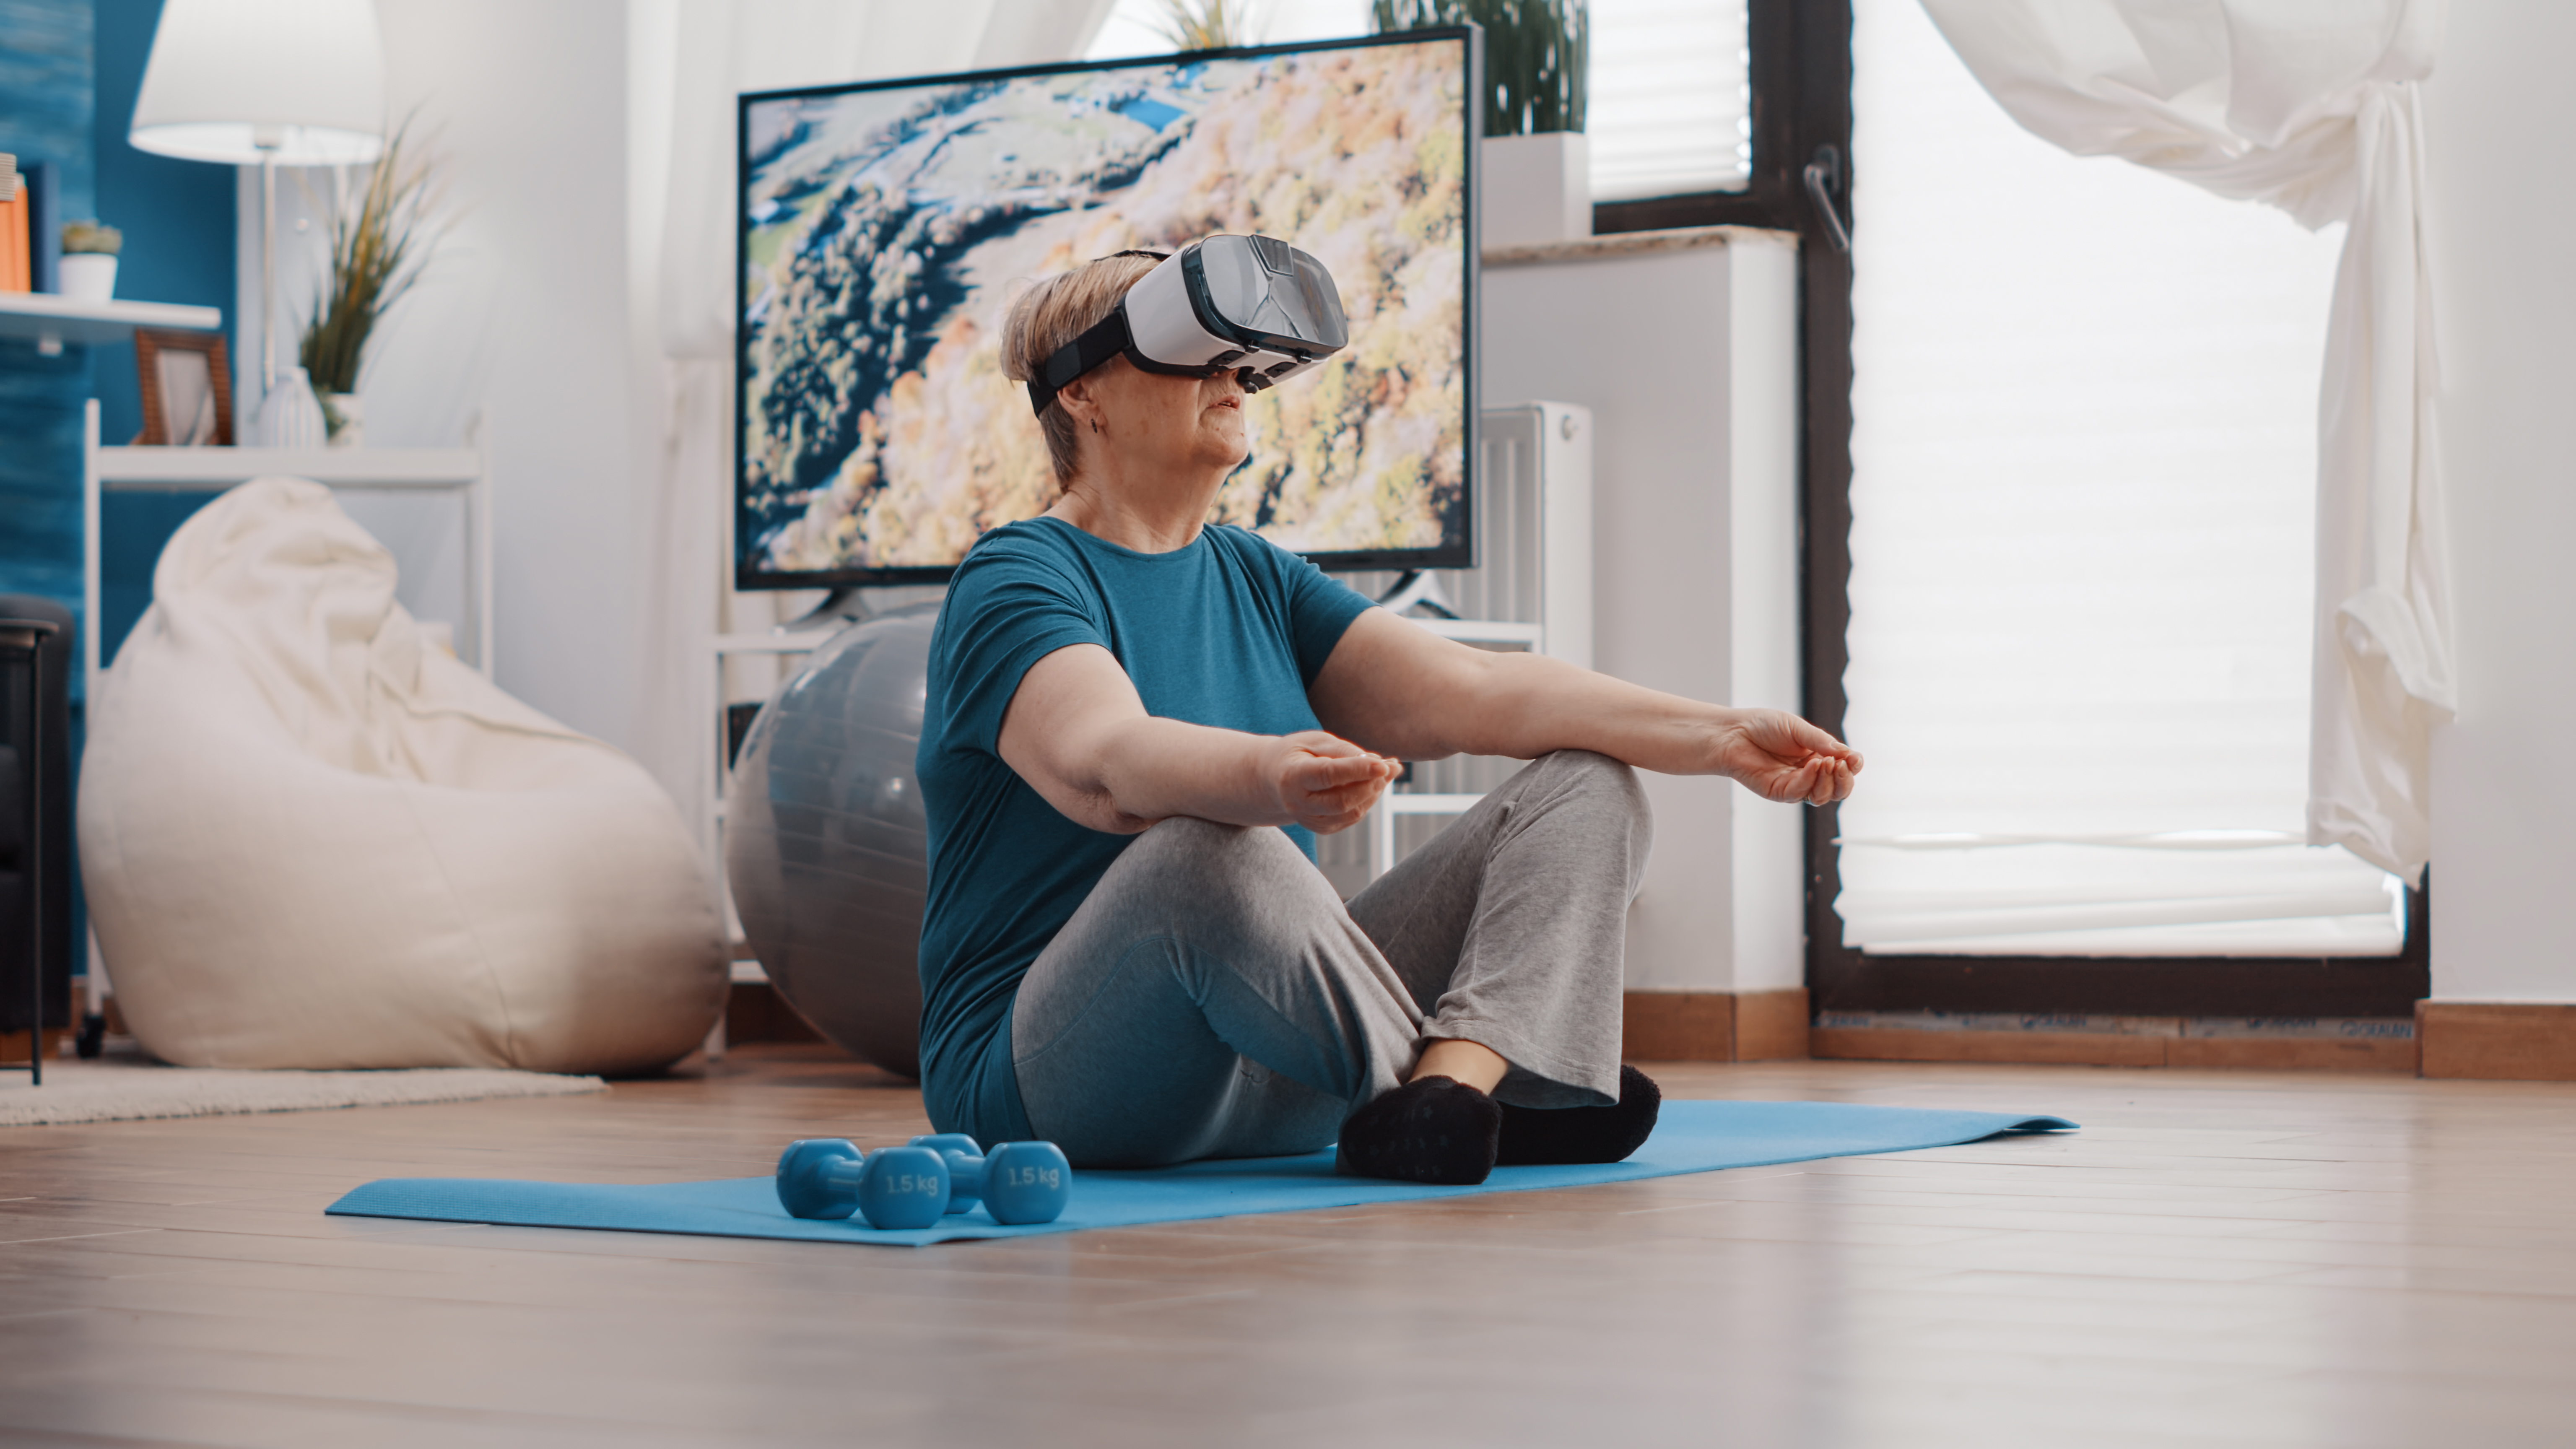 A person meditating with a VR headset